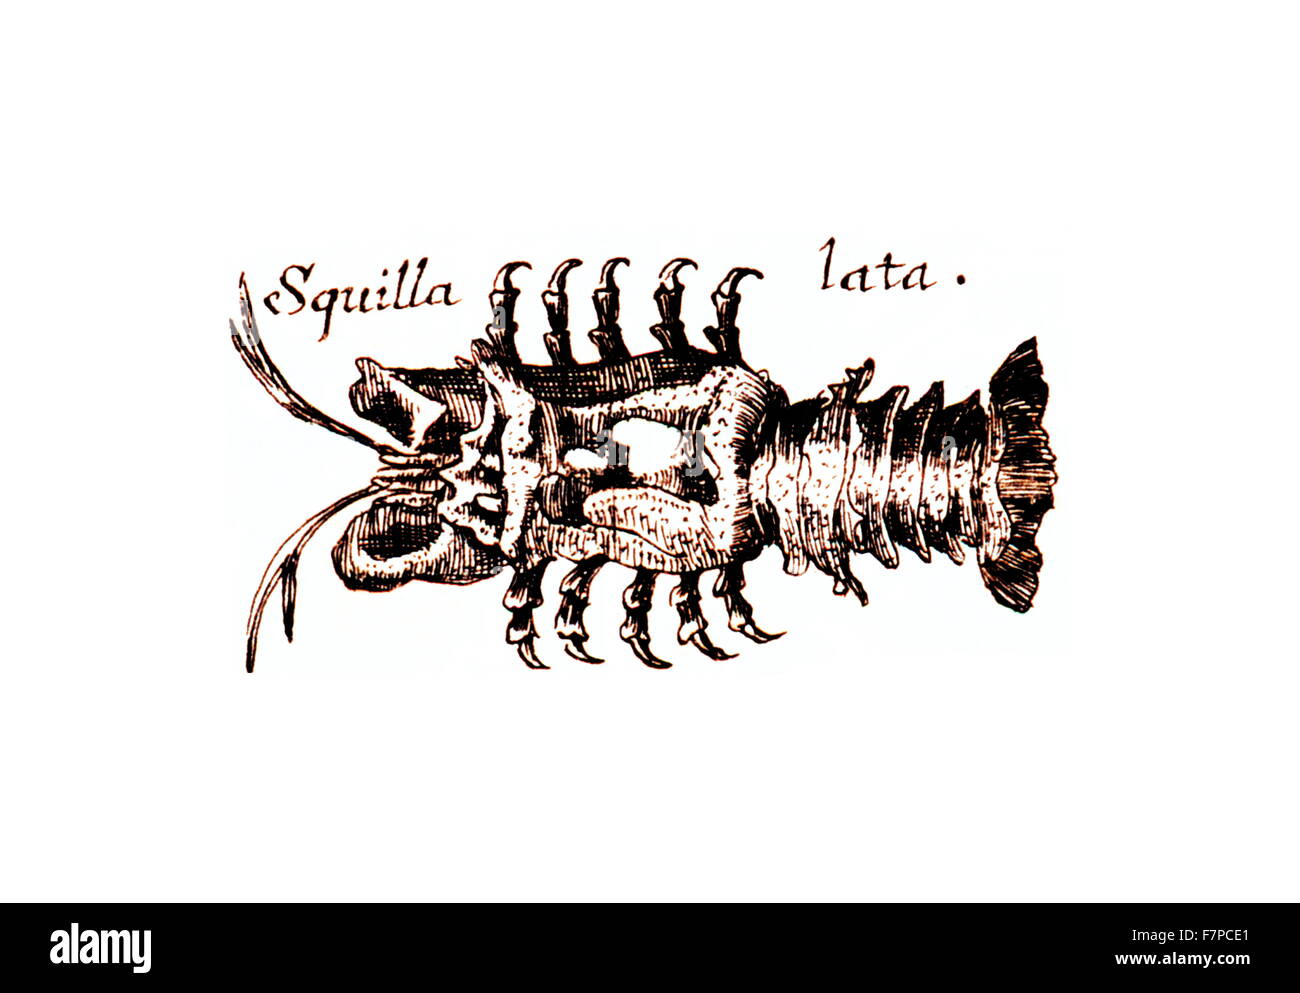 Squilla lata. A fish illustration from an early marine fish catalog. In: 'Specula physico-mathematico-historica ' by Johann Zahn.1696 Stock Photo